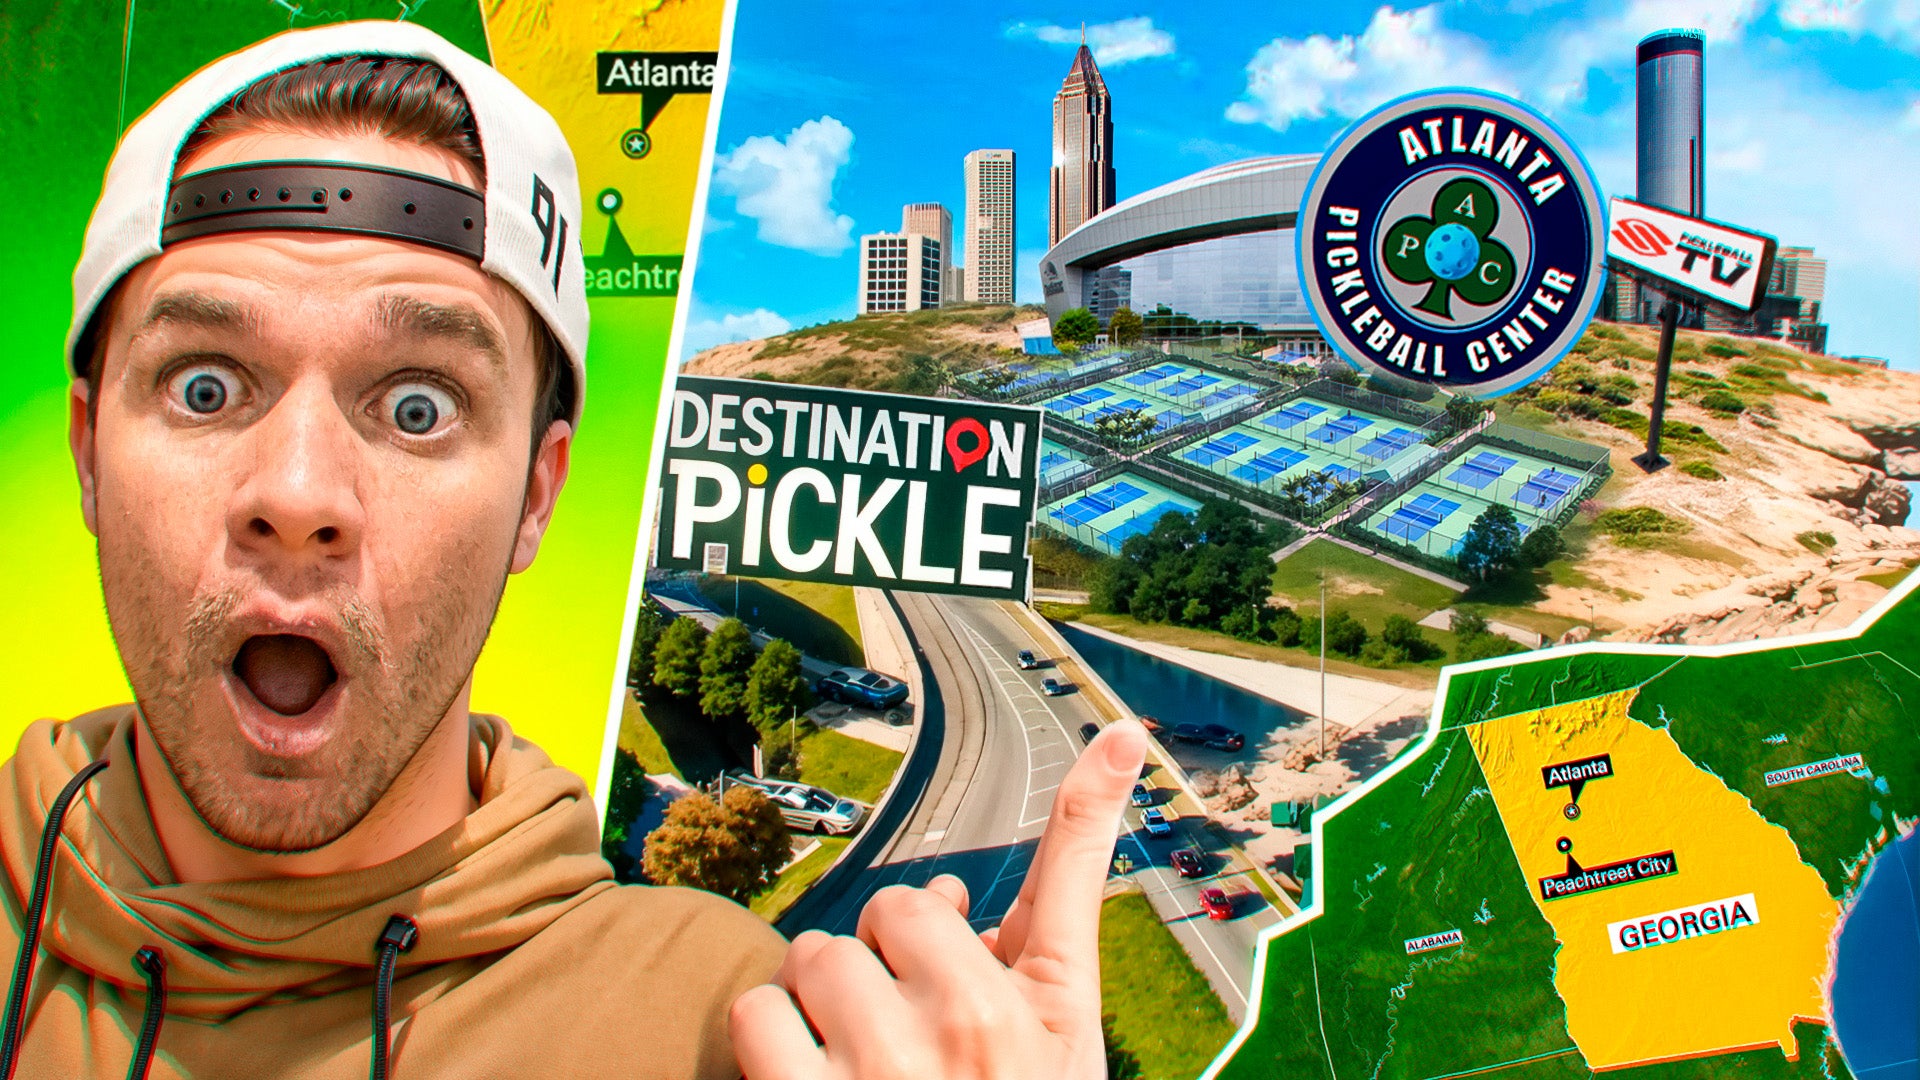 Rob Nunnery visits Atlanta on the latest episode of Destination Pickle